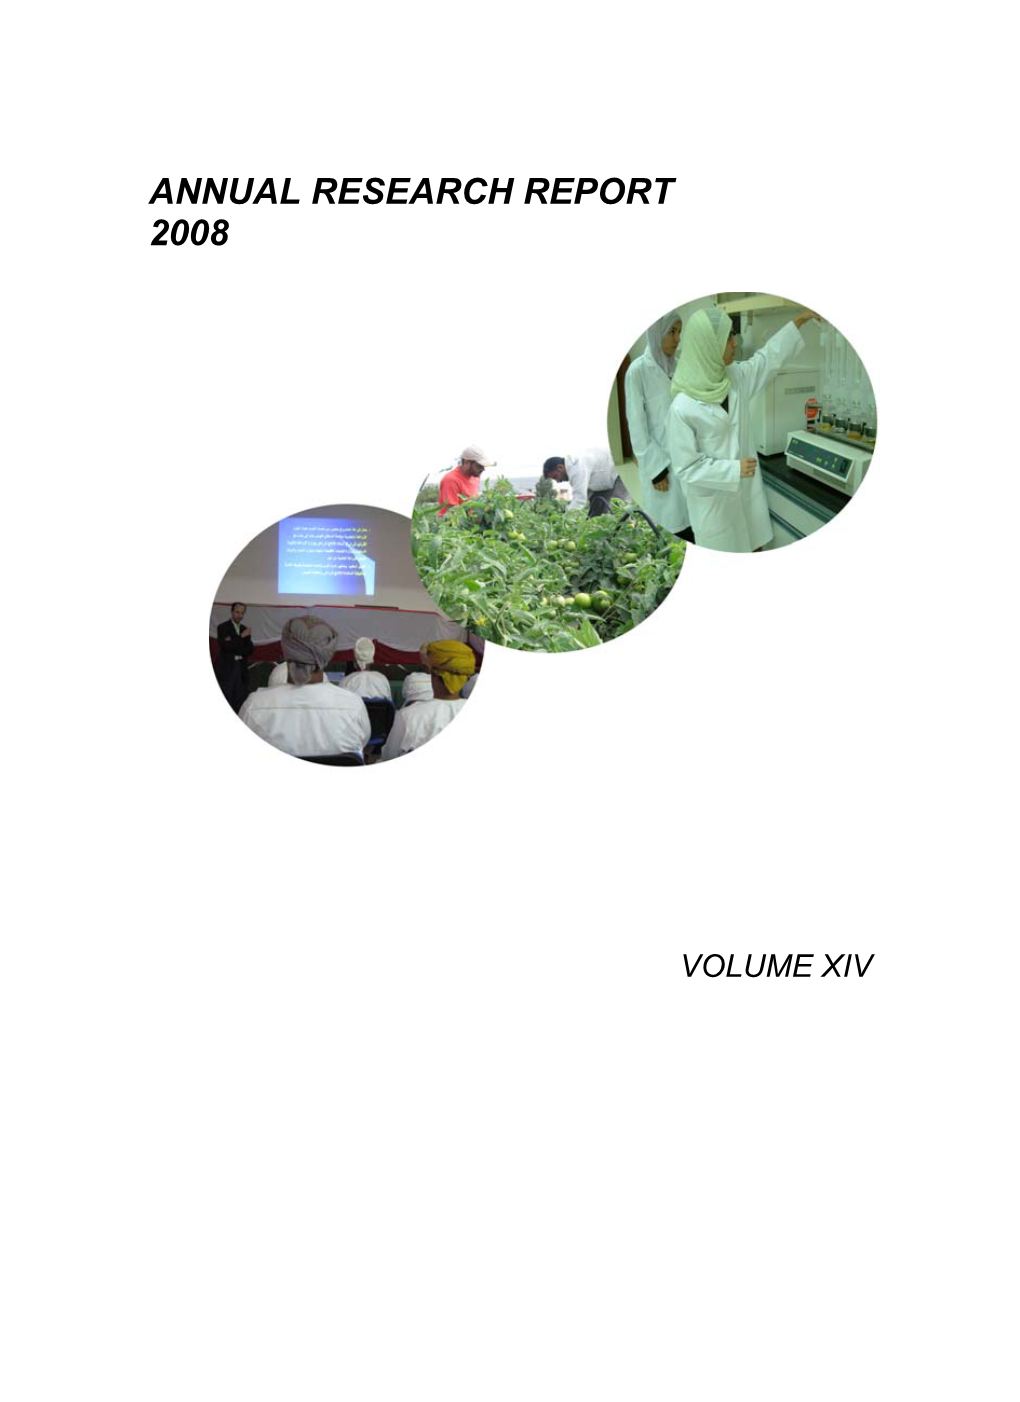 CAMS Research Report 2008